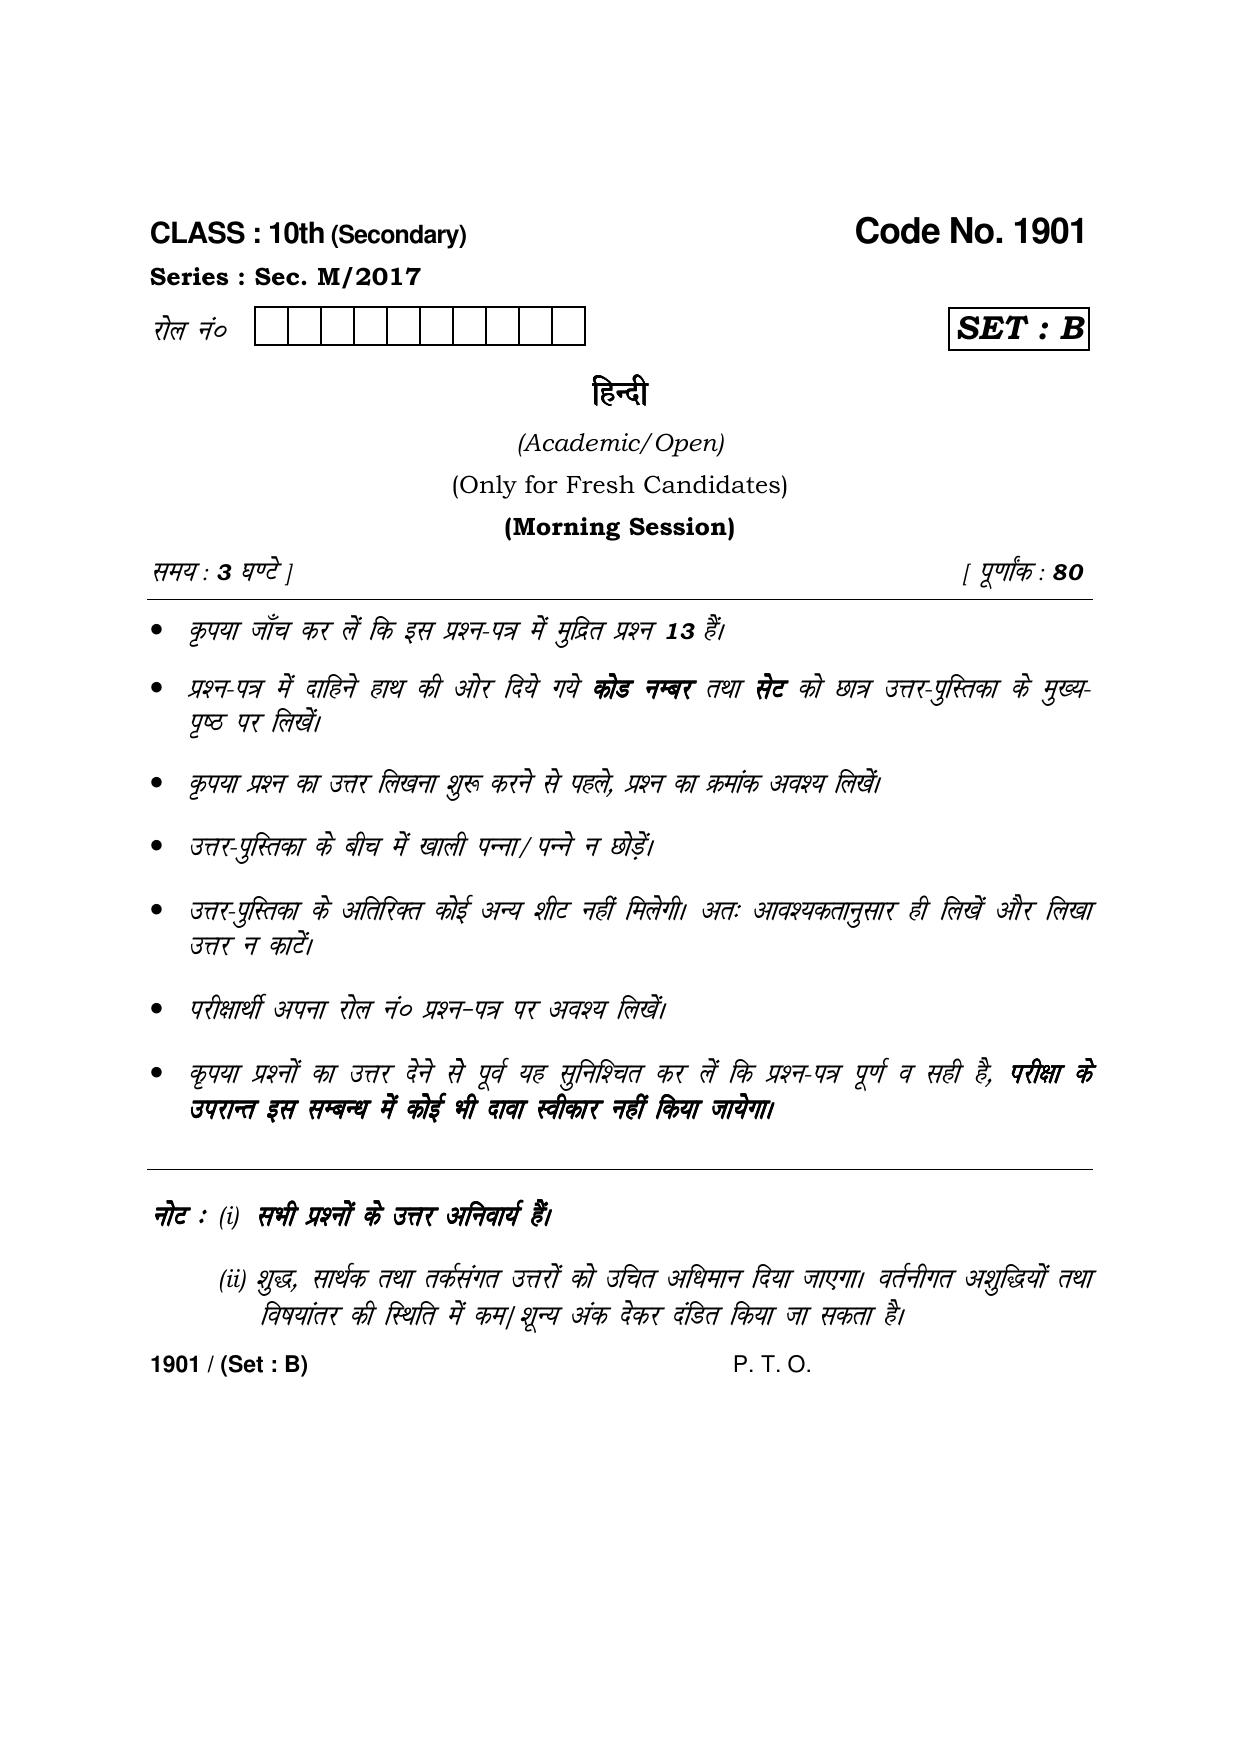 Haryana Board HBSE Class 10 Hindi -B 2017 Question Paper - Page 1